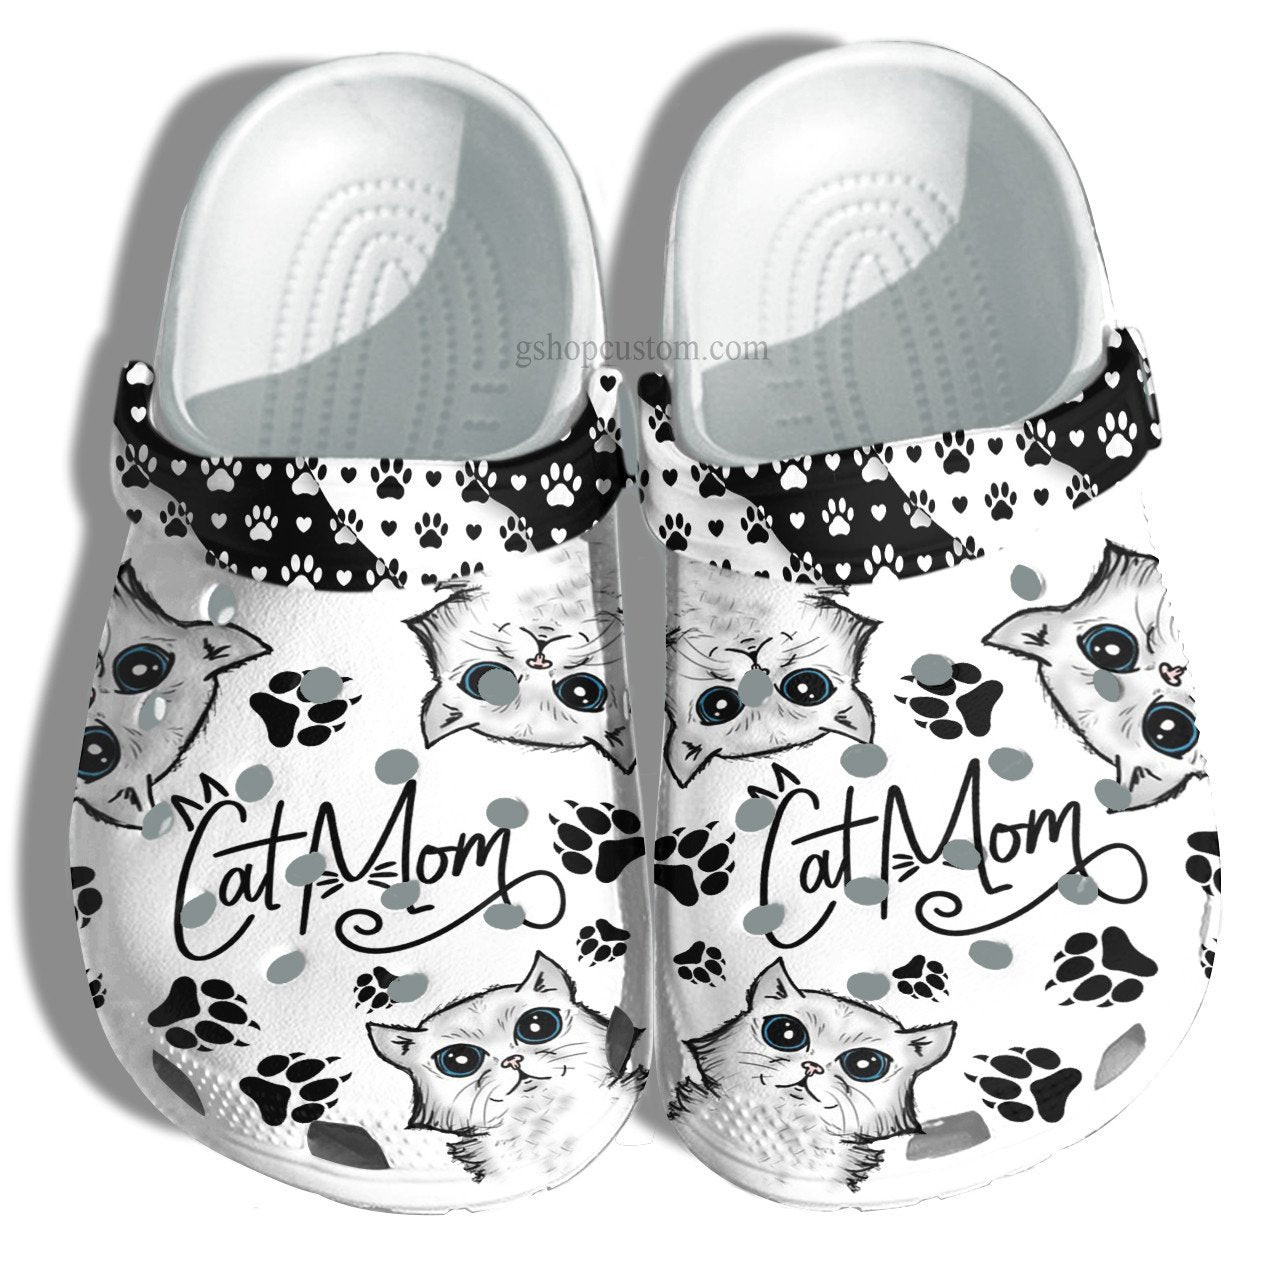 Cat Mom Crocs Shoes - Cat Paw Cat Lover Shoes Croc Clogs Gift Mother Day